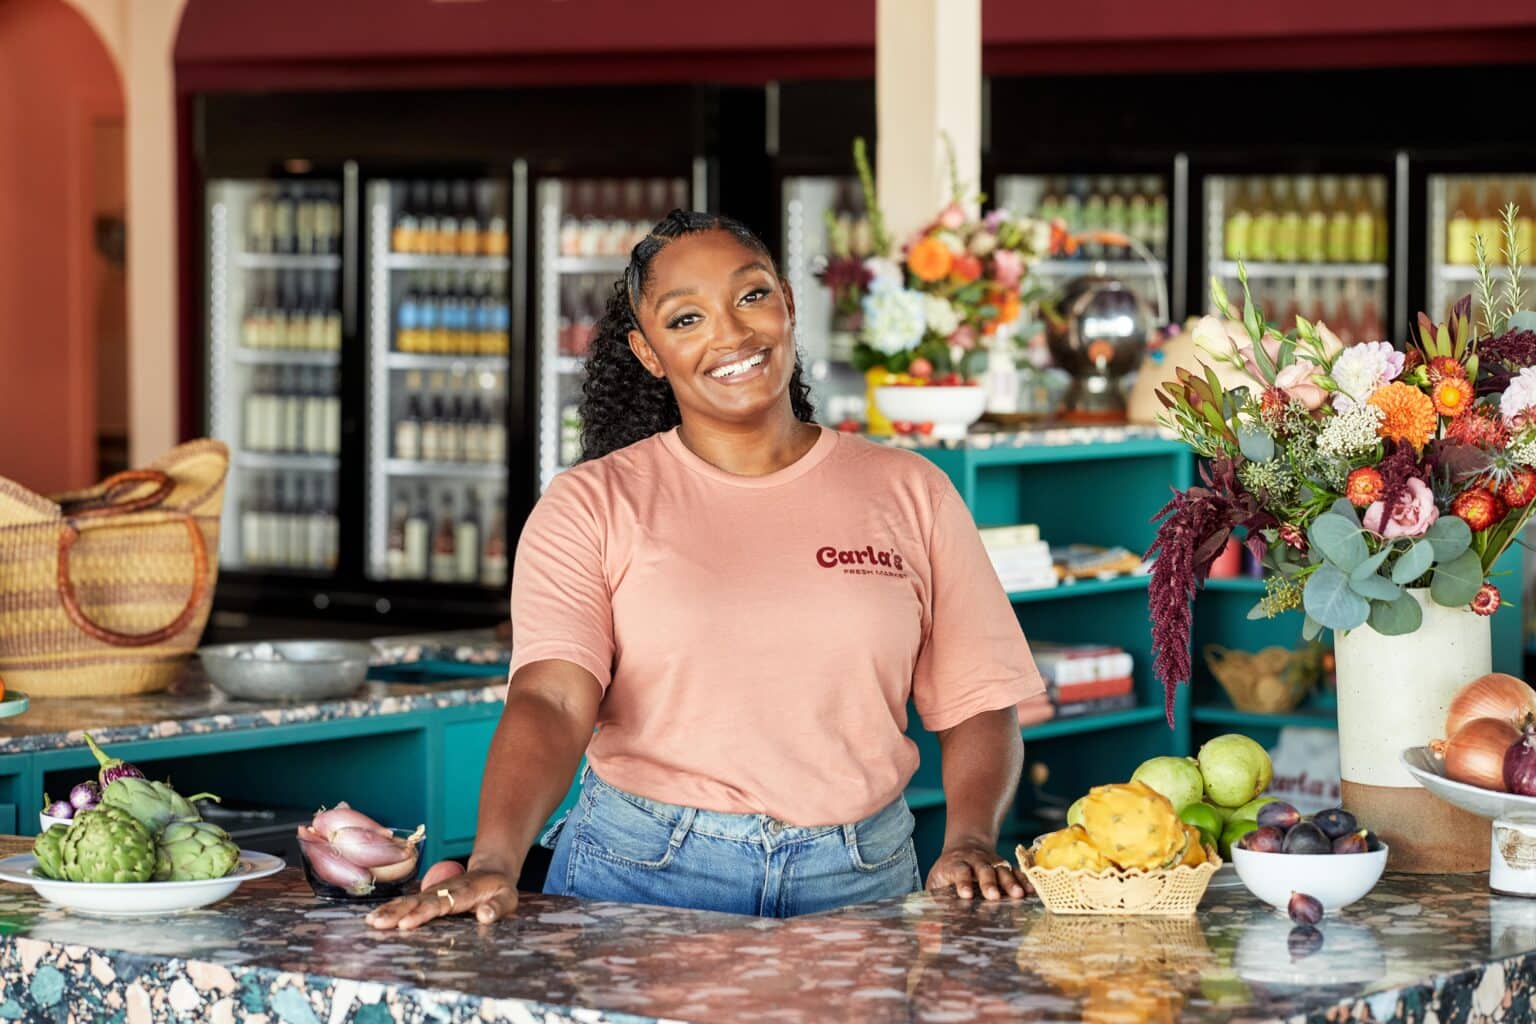 Ariell Ilunga, founder of Carla's Fresh Market in Los Angeles